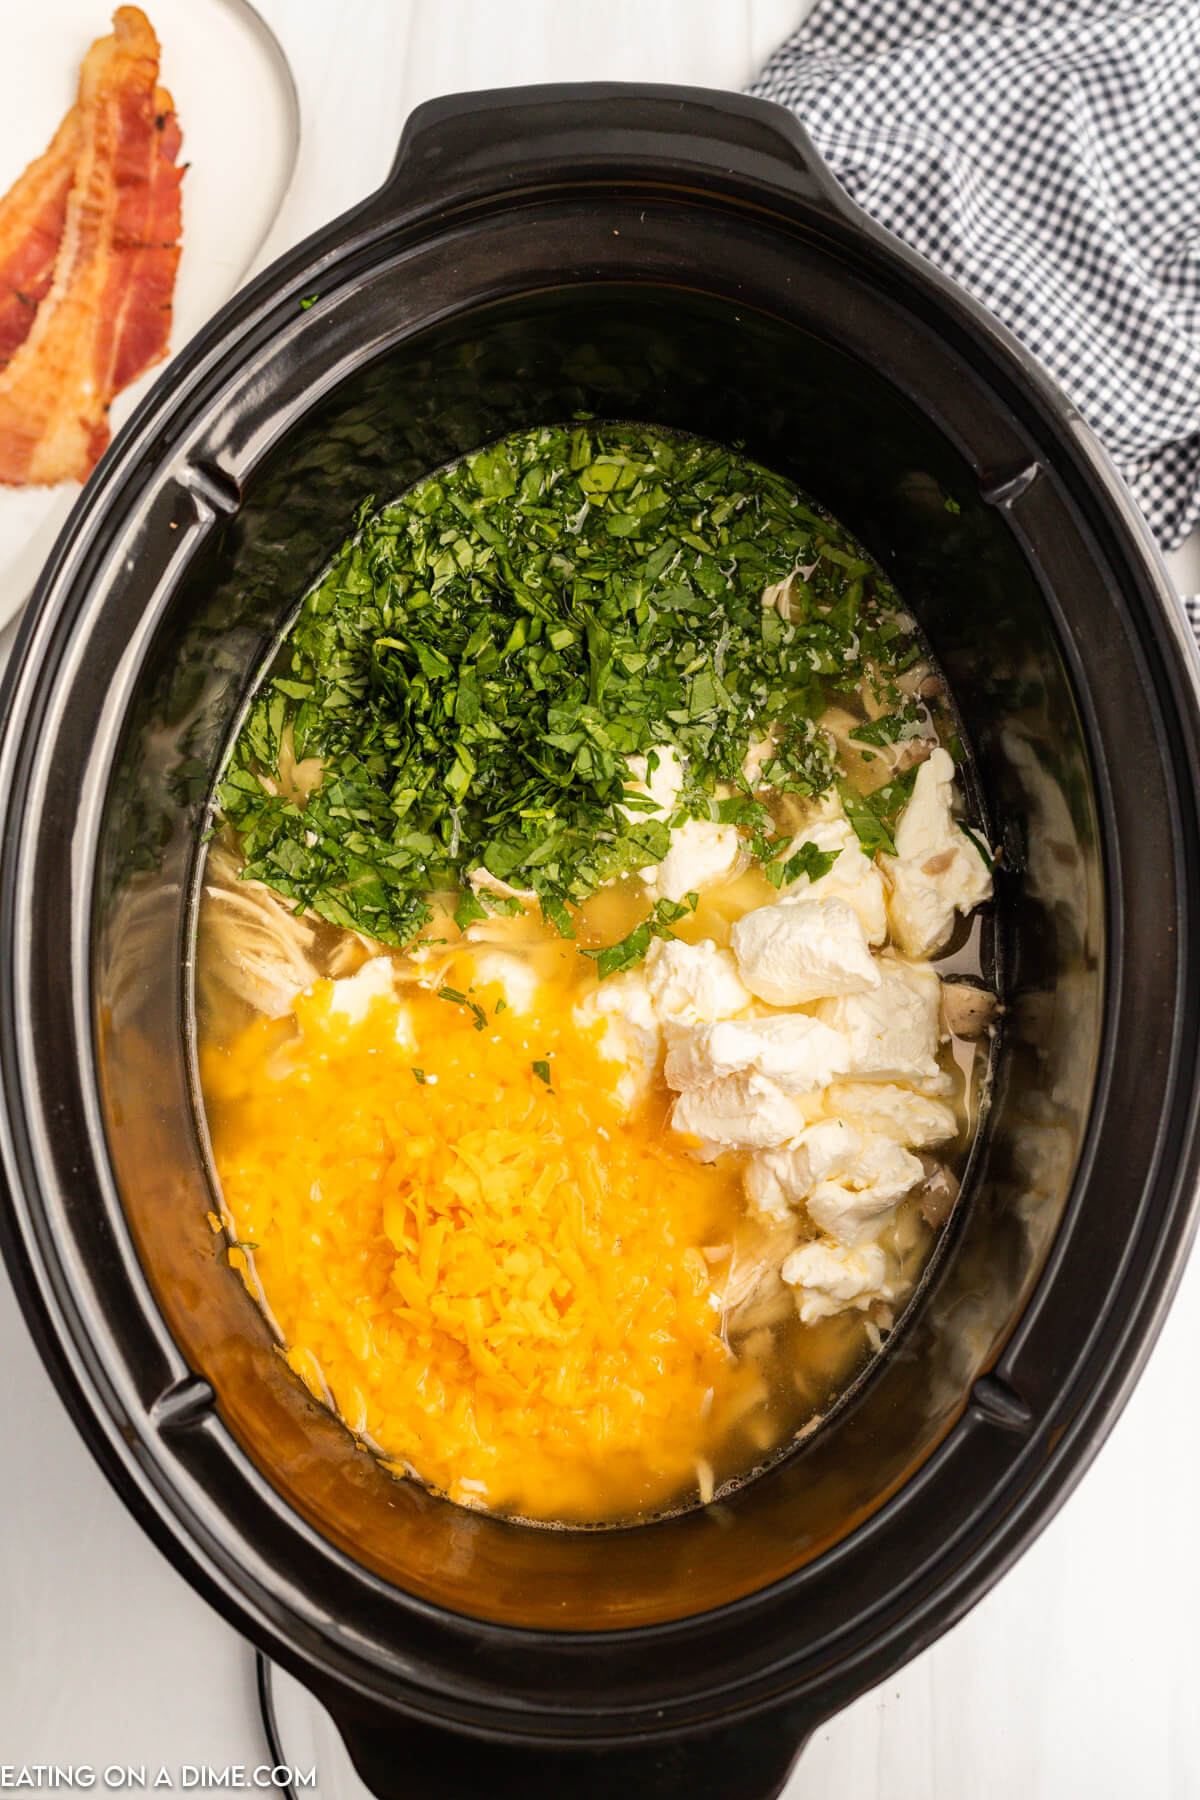 Mixing in the cream cheese, cheese, and kale to the slow cooker